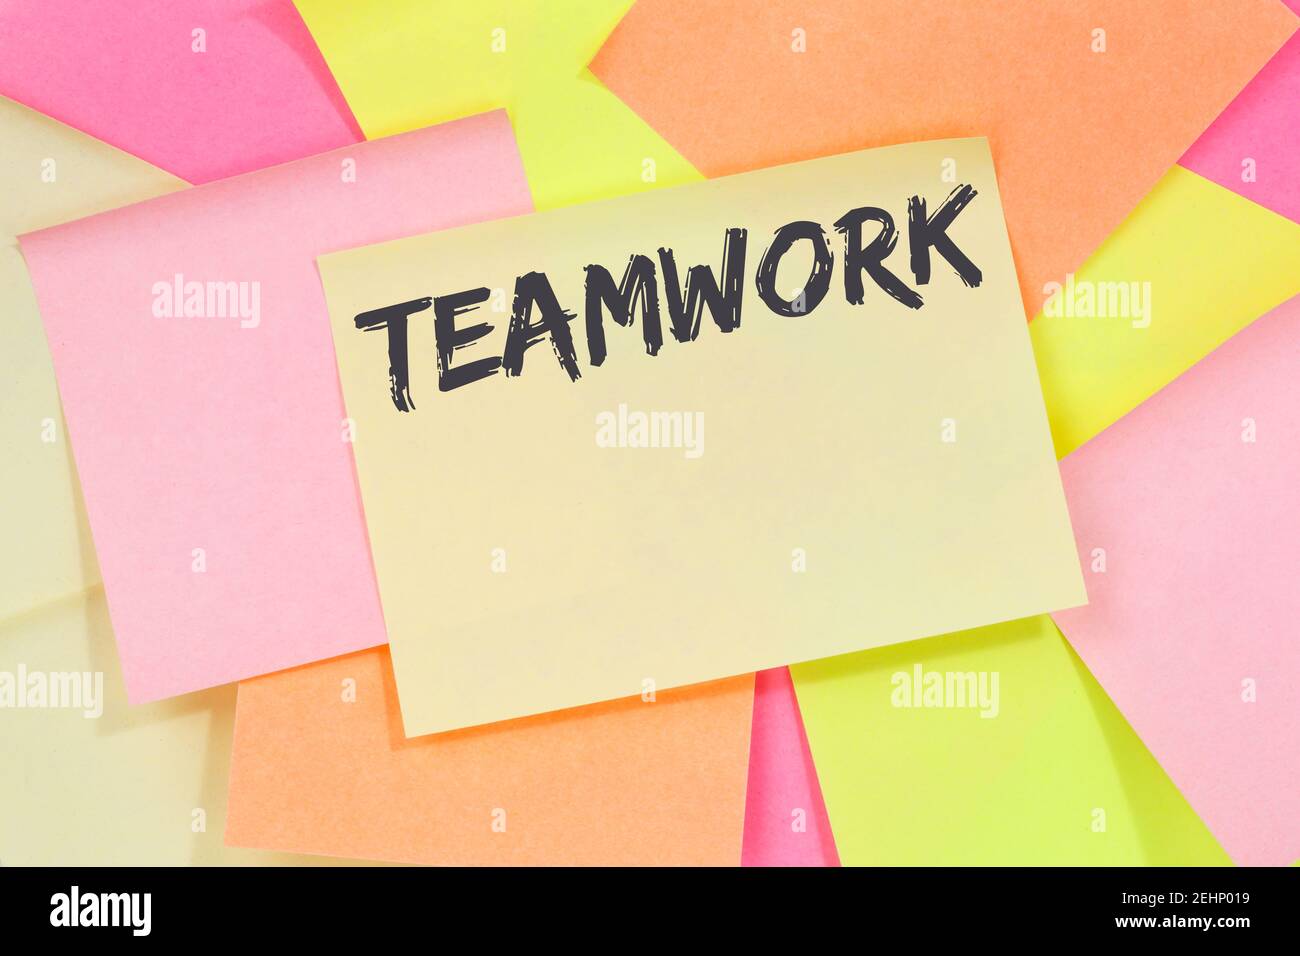 Teamwork team working together success business concept note paper notepaper Stock Photo